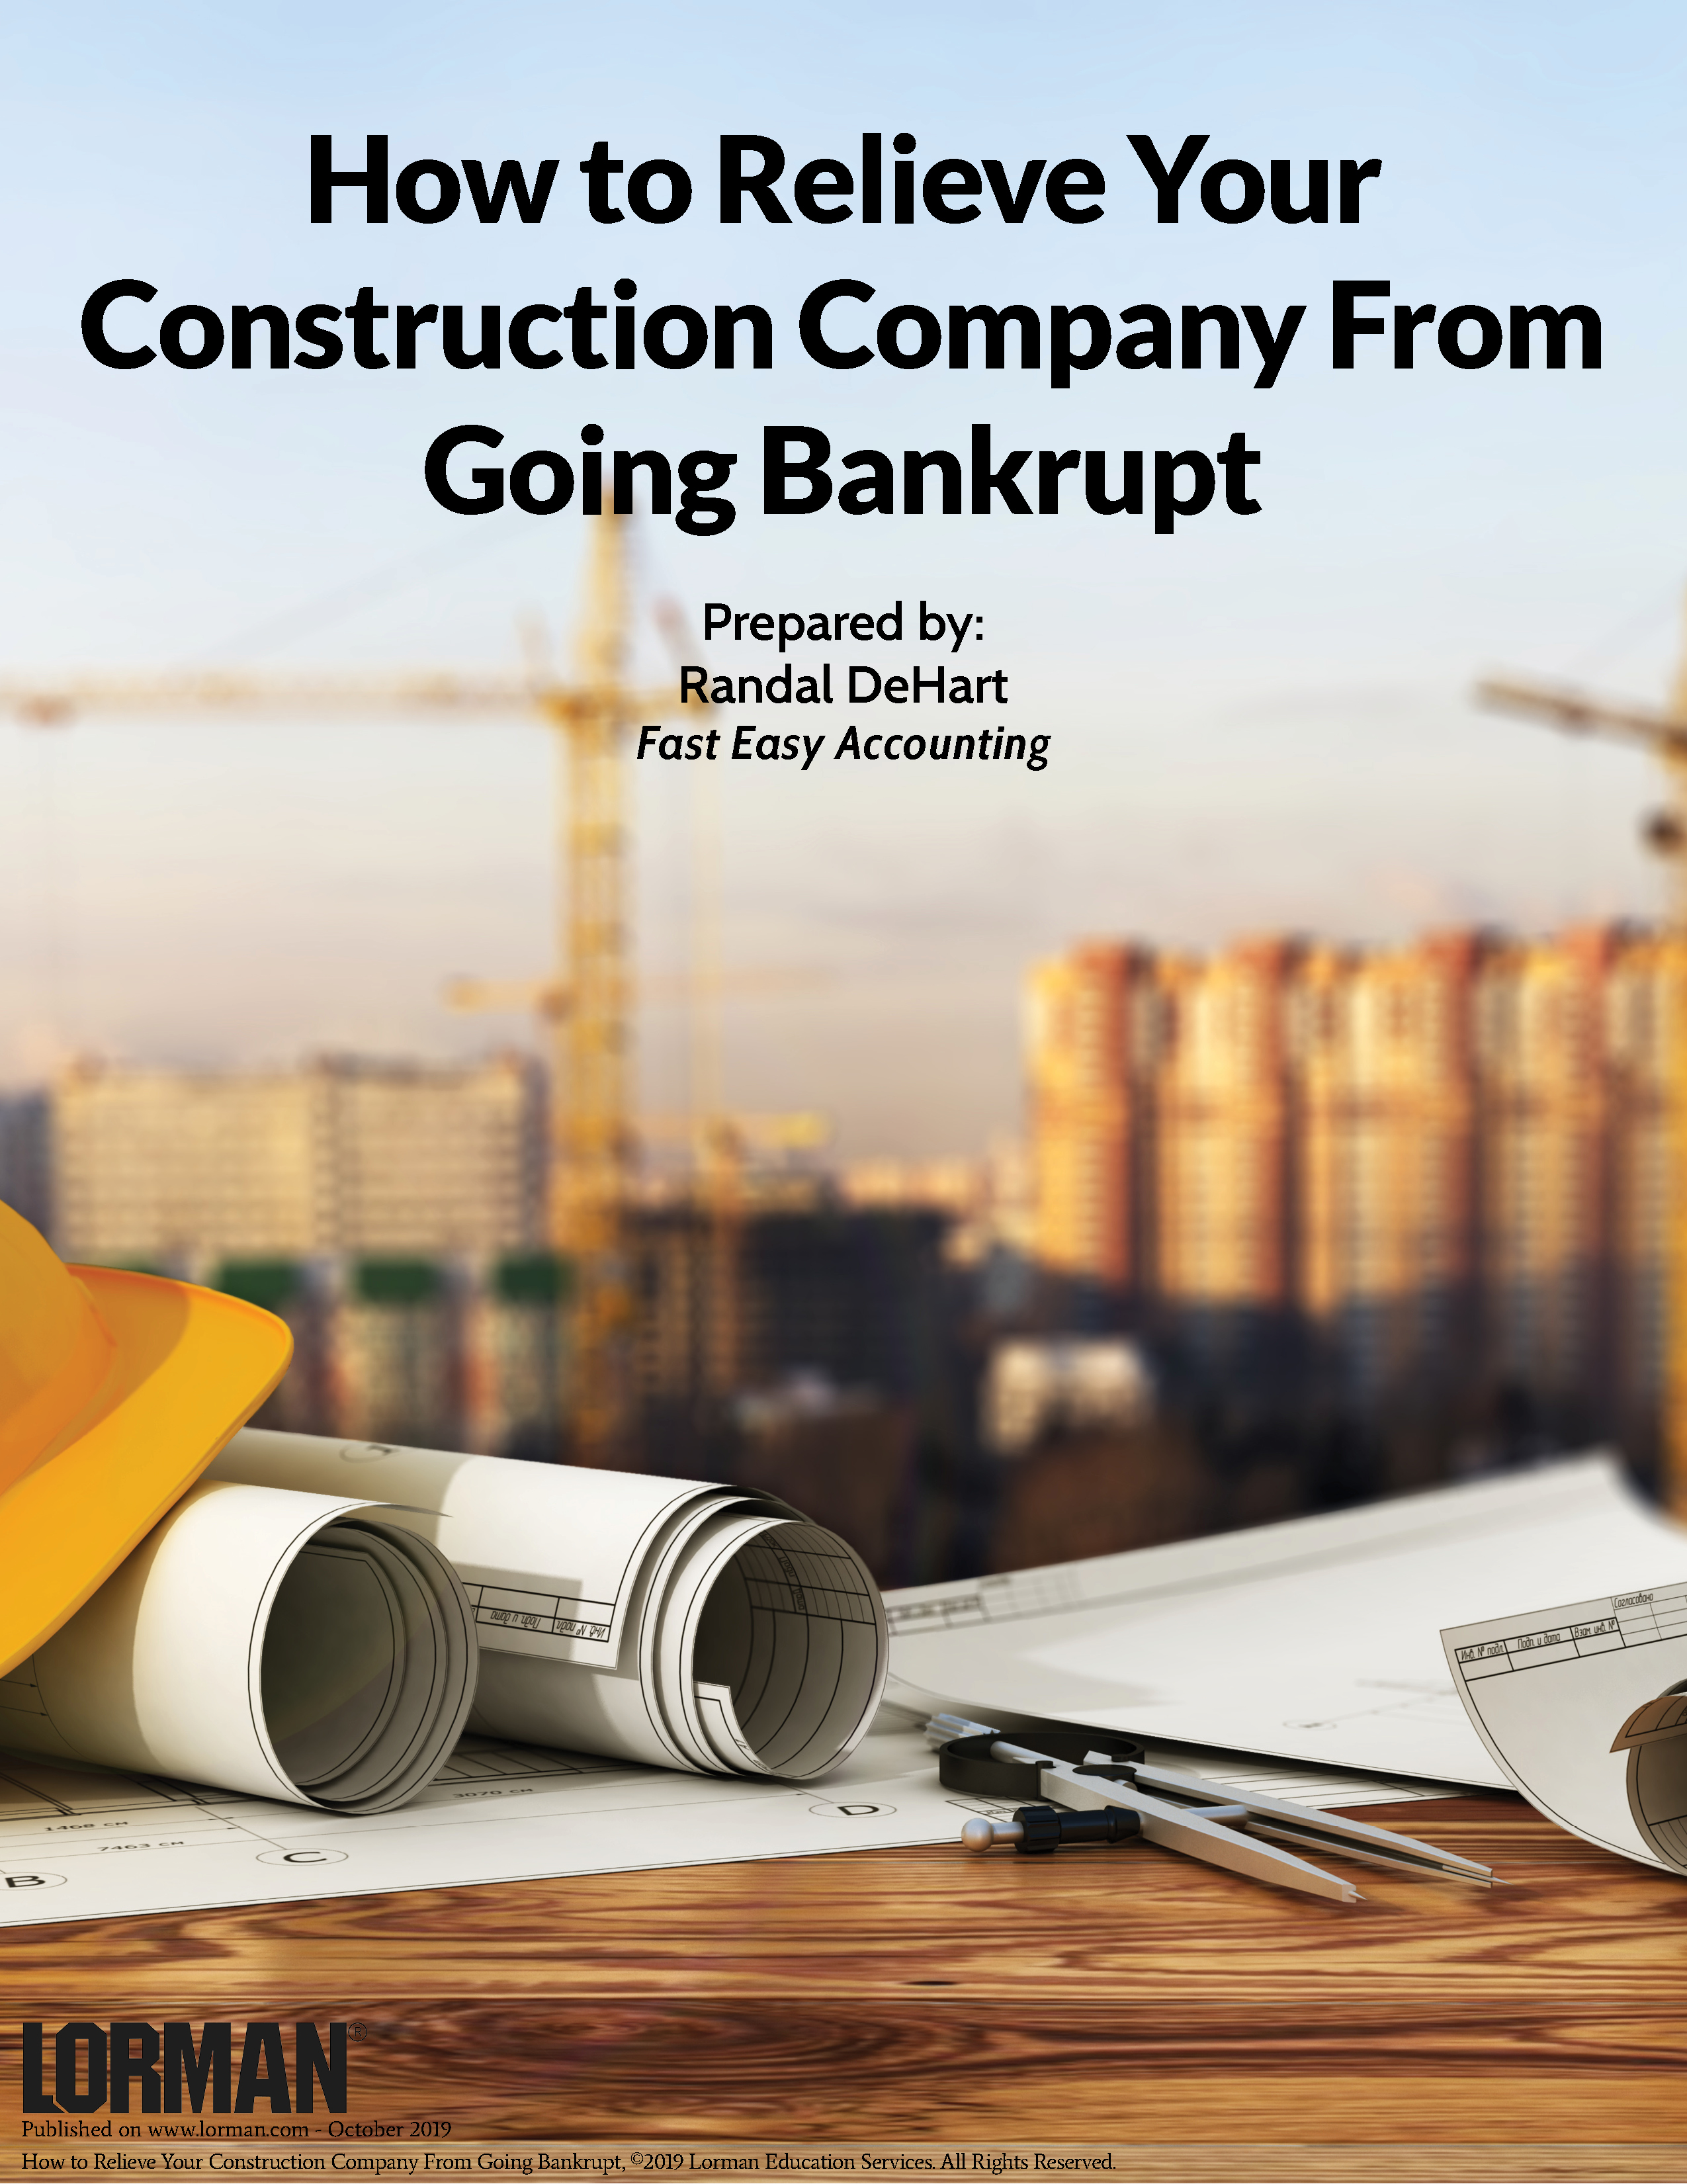 How to Relieve Your Construction Company From Going Bankrupt